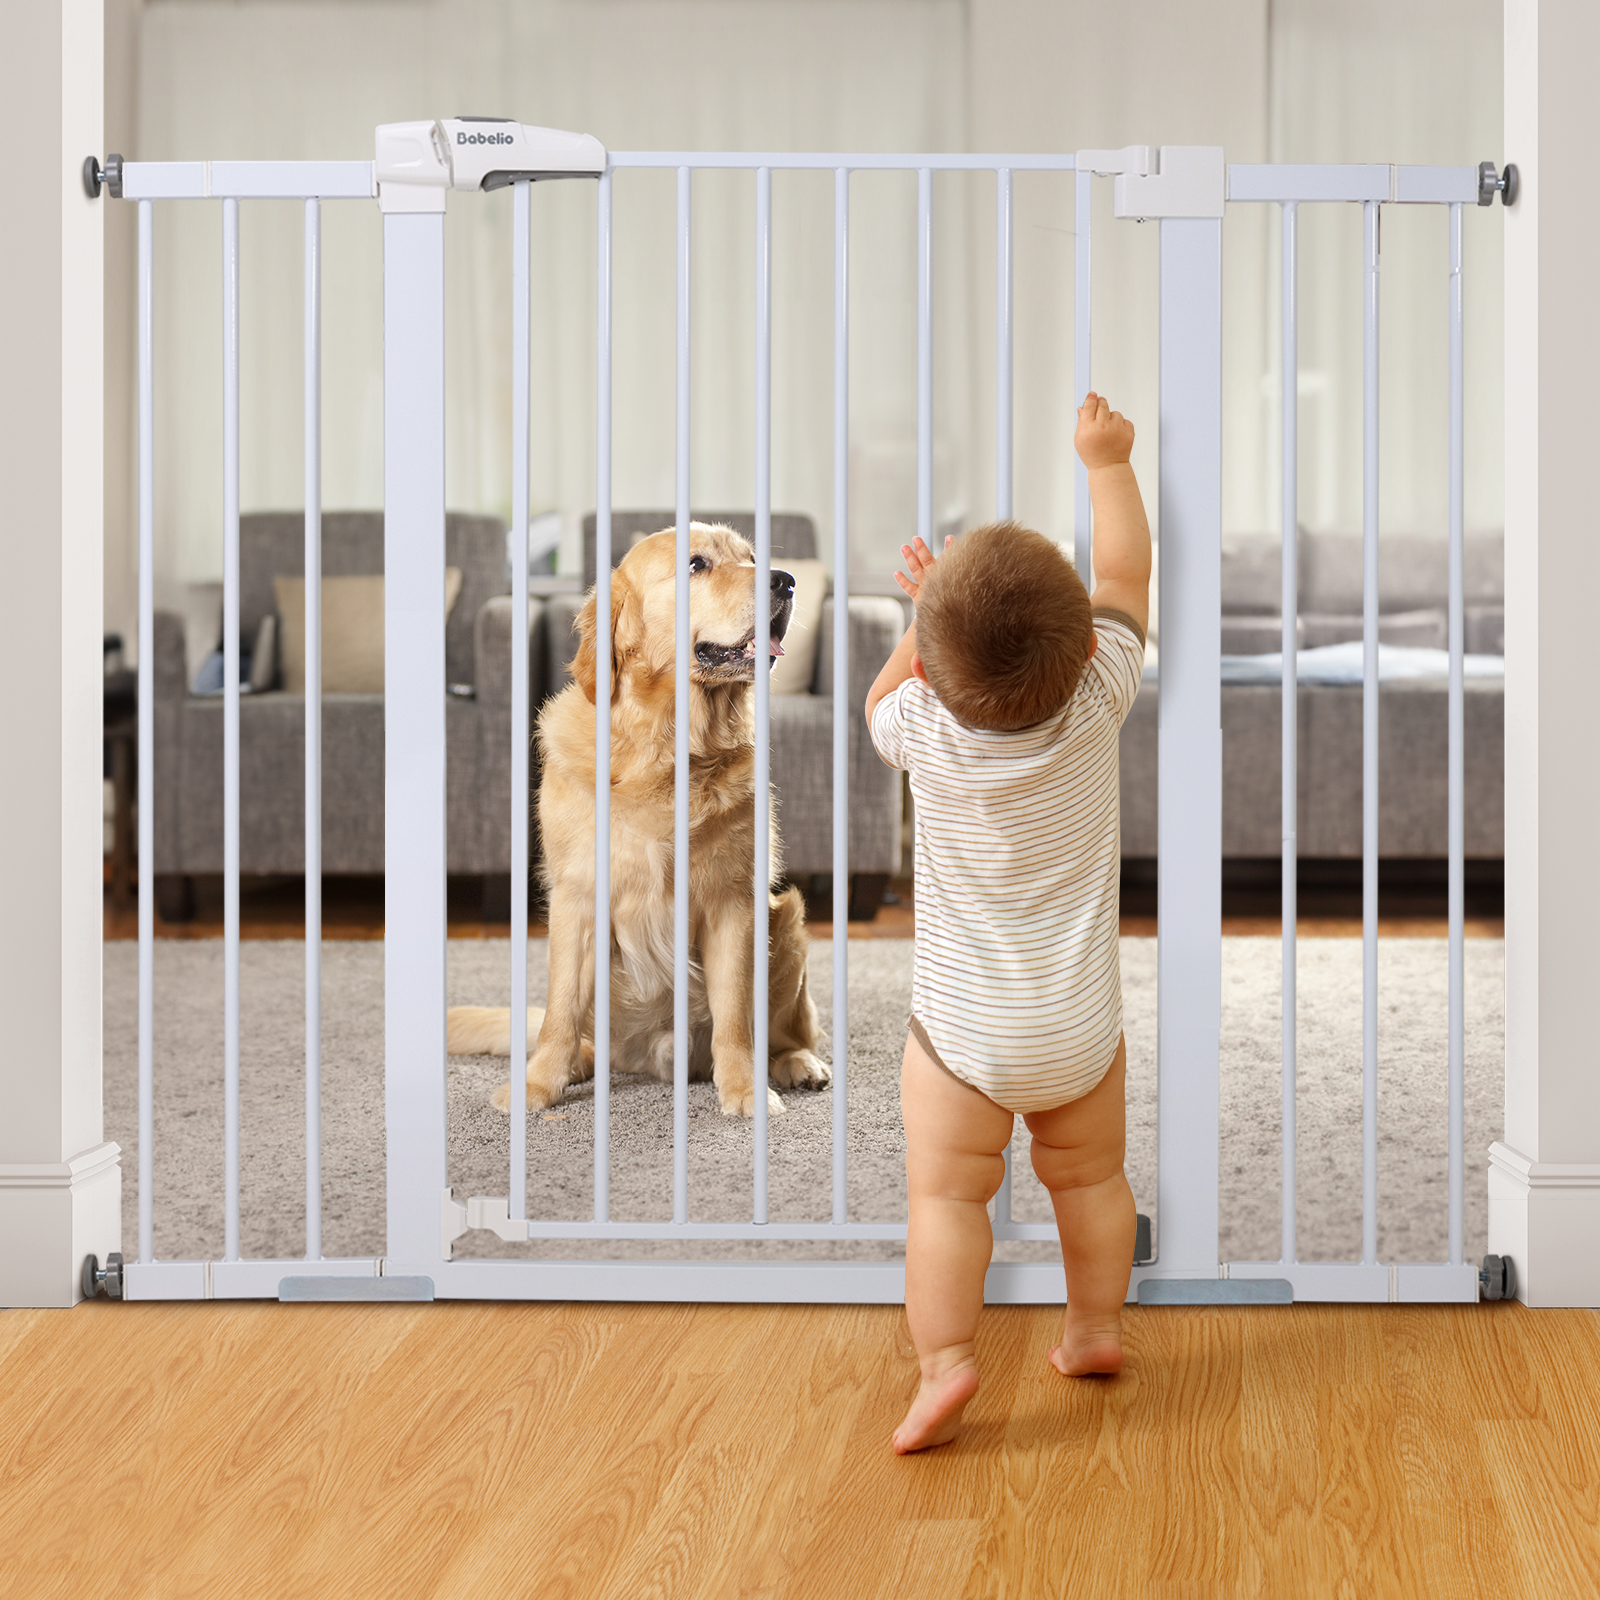 Mom's Choice Award Winner: BABELIO 36" Extra Tall Metal Baby & Pet Gate for Stairs and Doorways